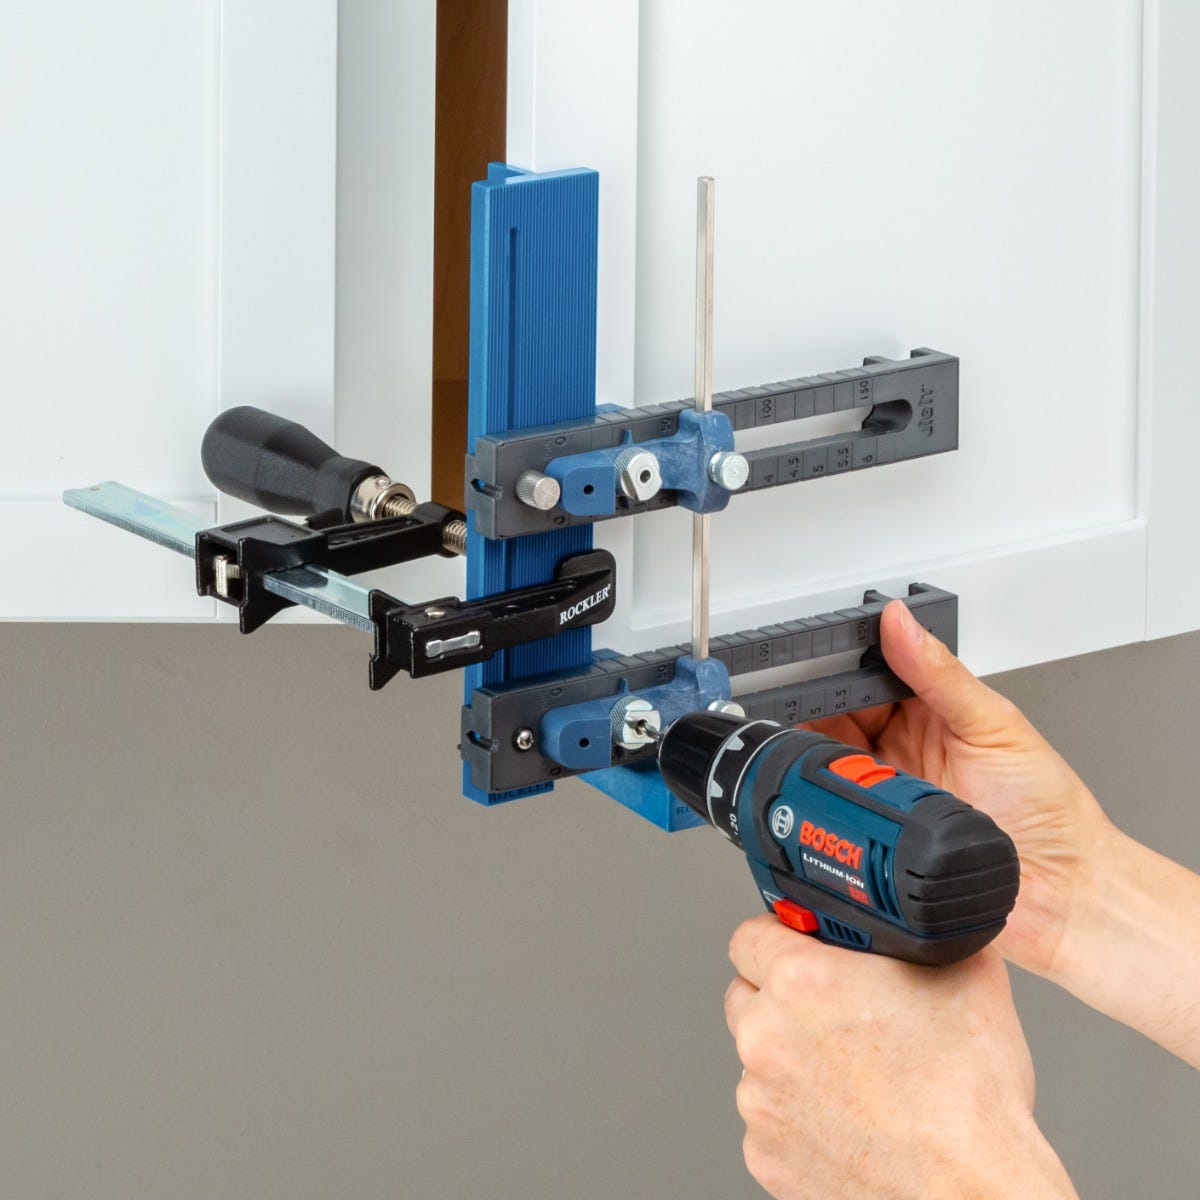 Rockler Knob and Pull Pro Drilling Guide